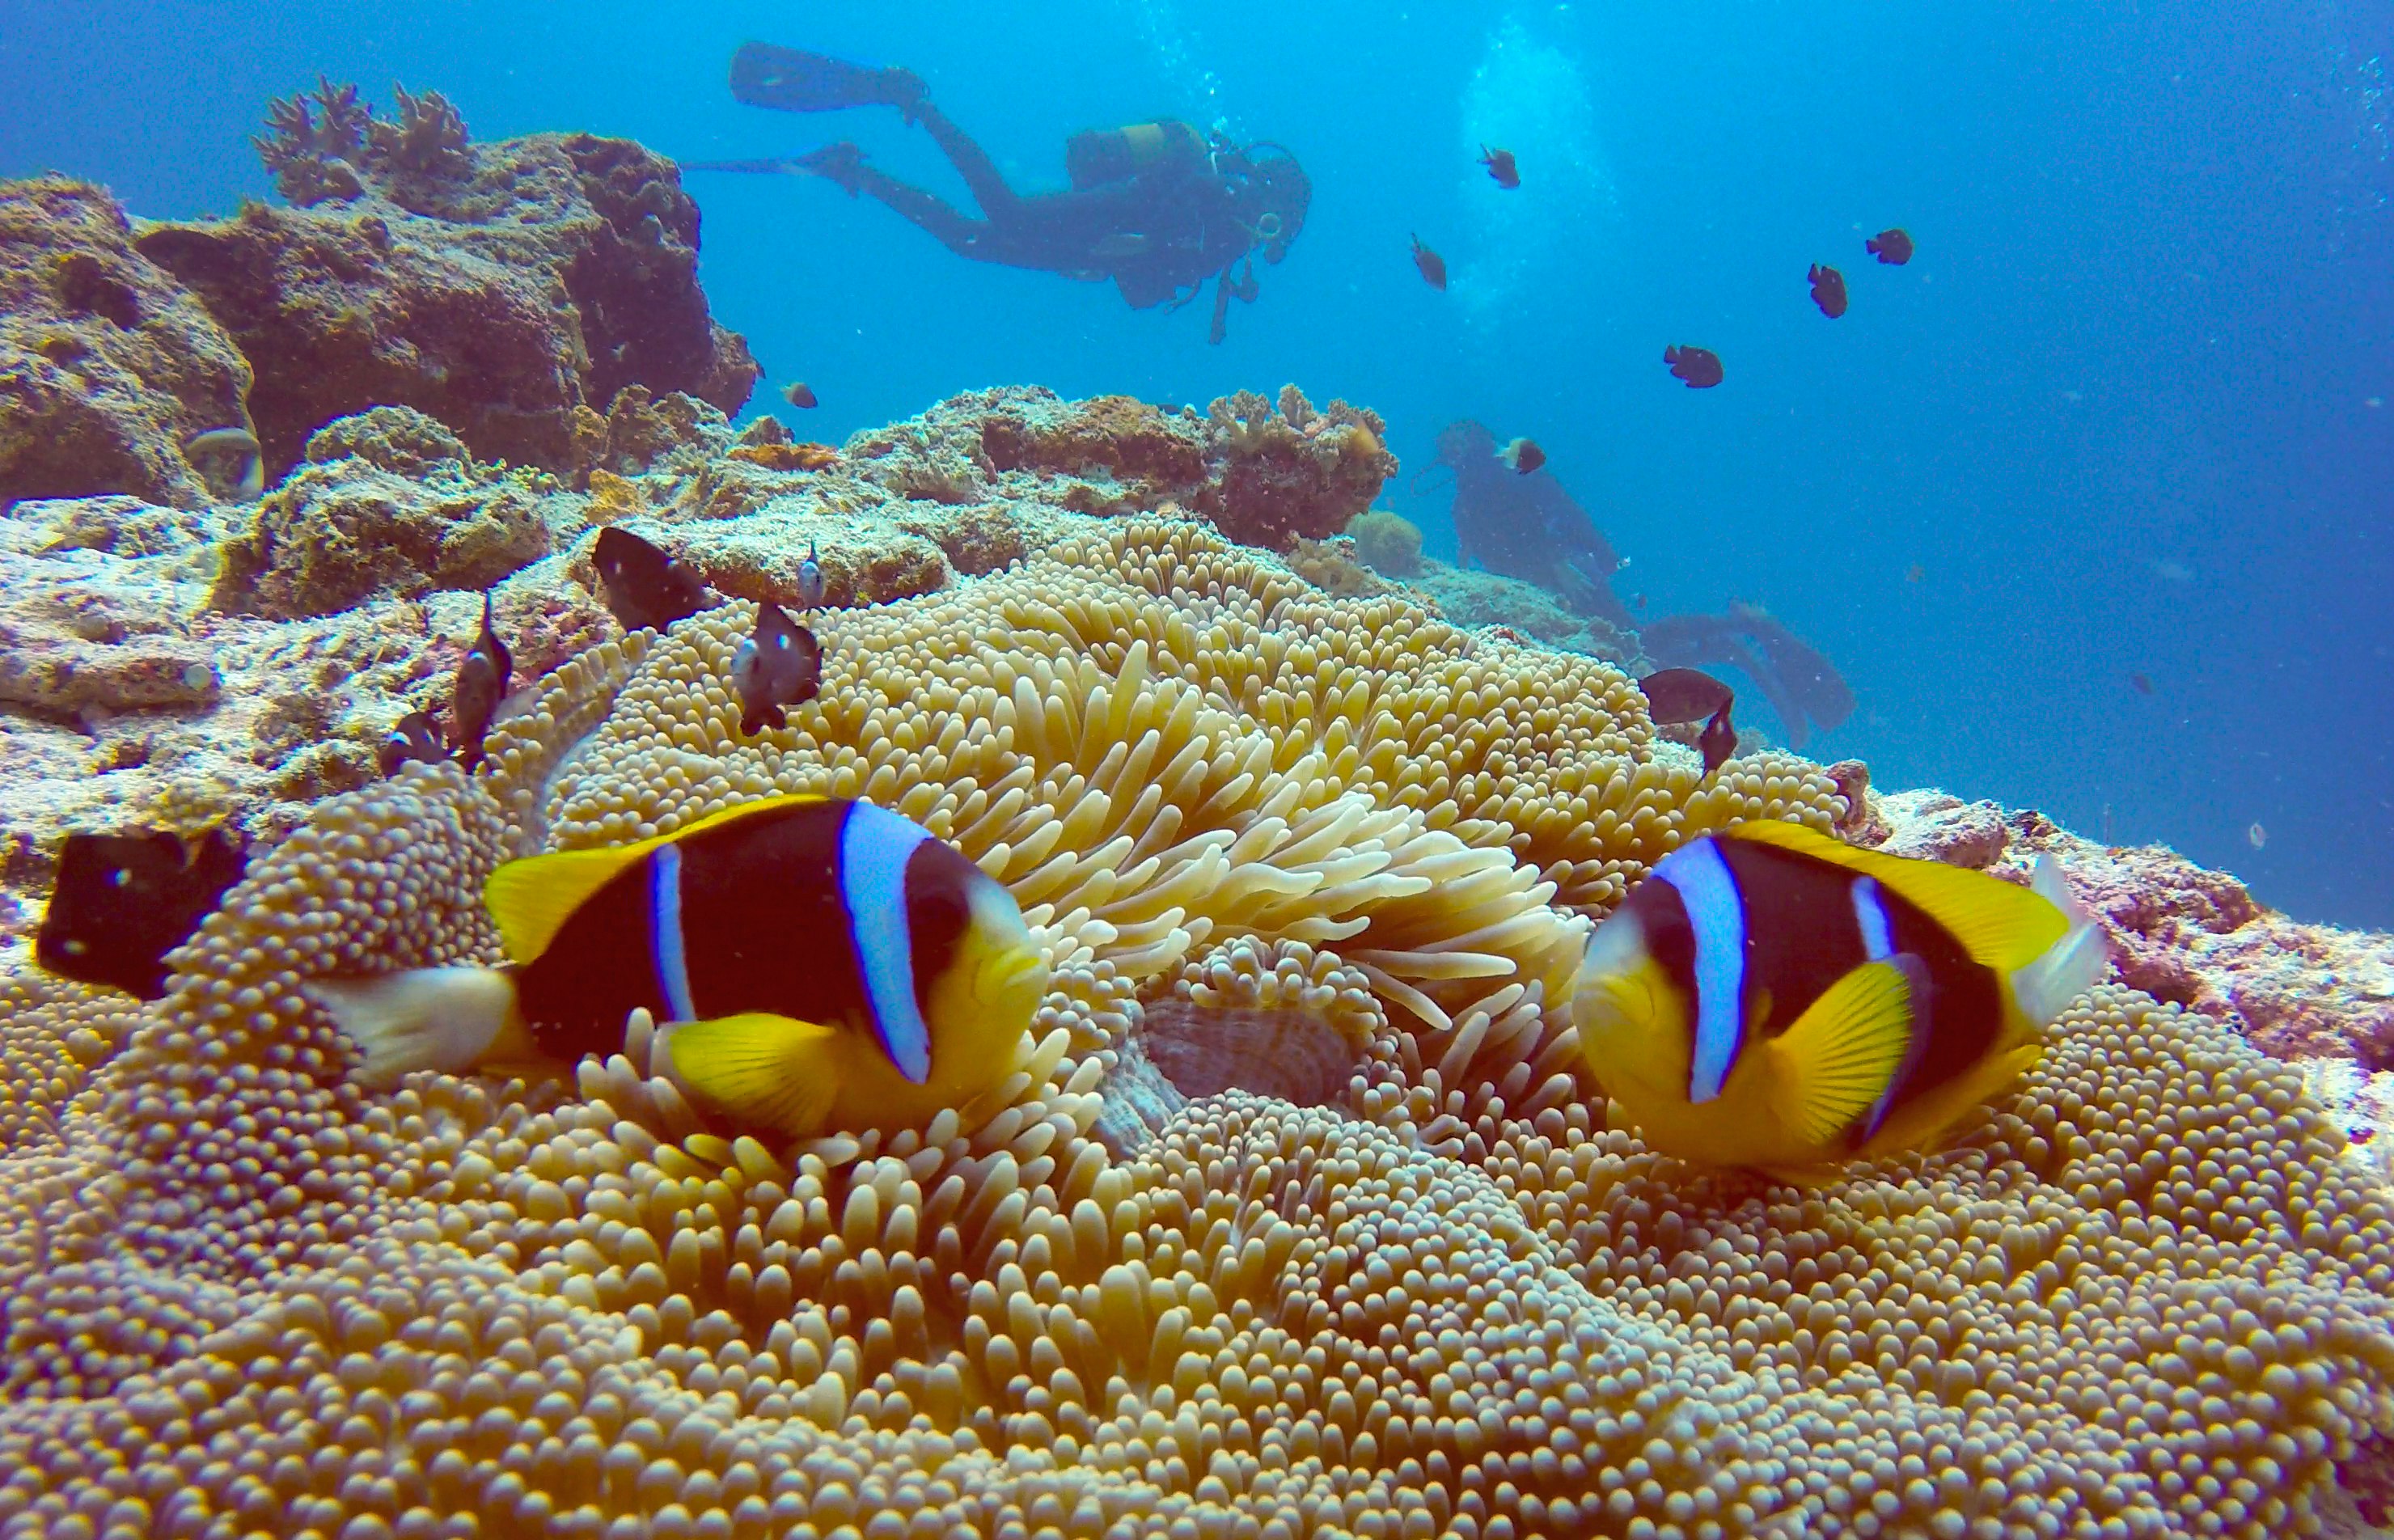 A pair of scuba divers swim in bright blue water behind a yellow and tan coral reef. In the extreme foreground, a pair of clown fish that almost mirror the divers' positions in the water are bright yellow, electric blue, and black.